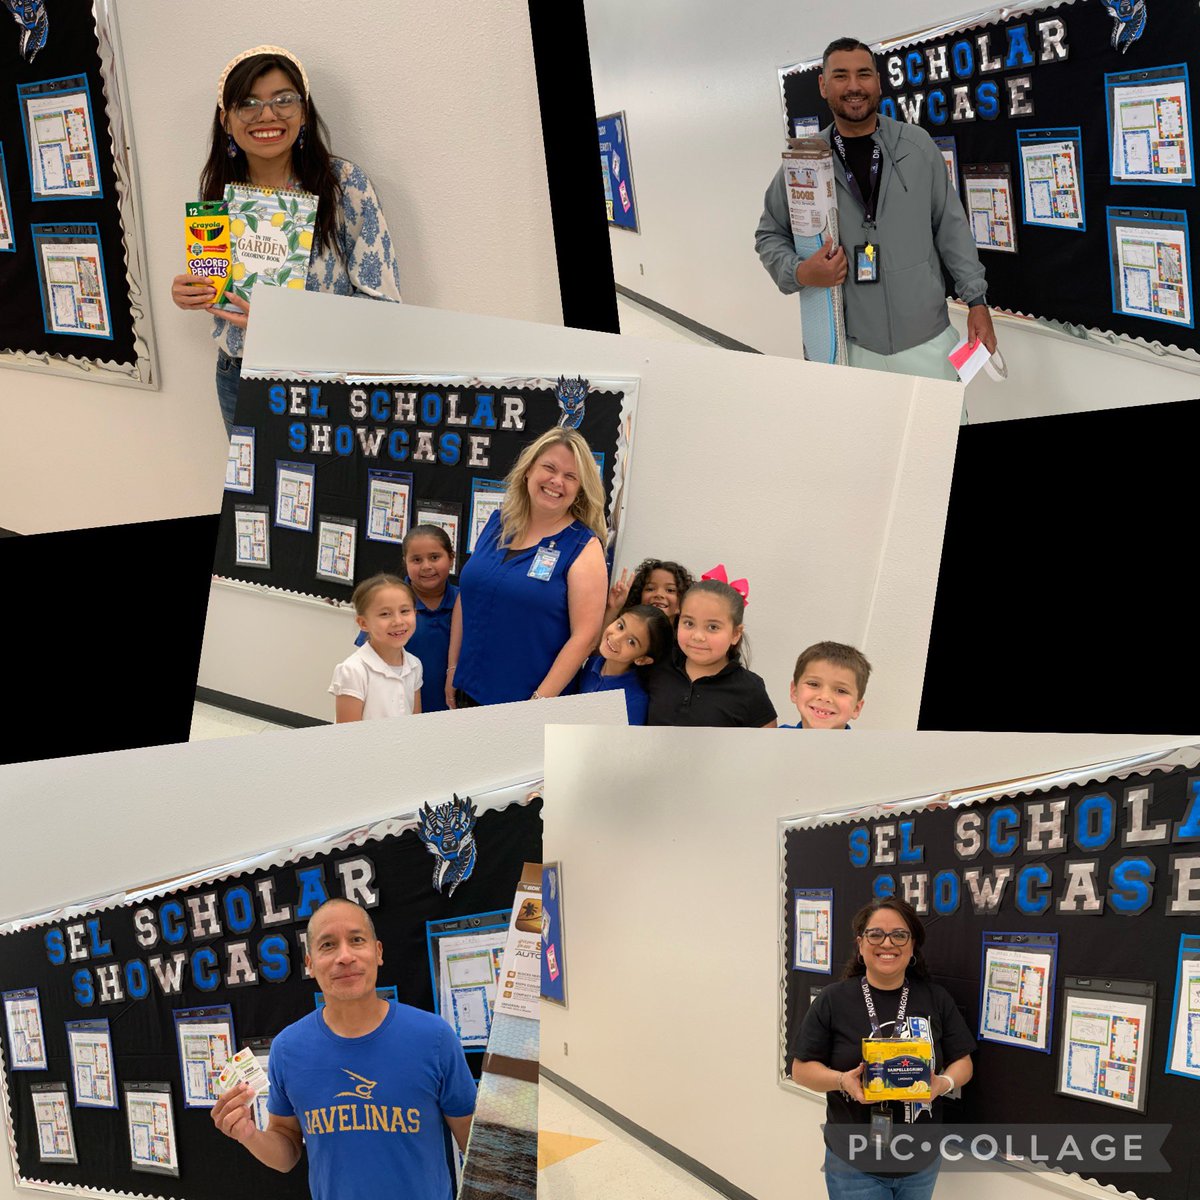 More of our JDS teacher winners! The Drugan counseling team was happy to raffle prizes for our outstanding teachers all week long! We appreciate you! @Araceli06494071 @RLeyva_JDS